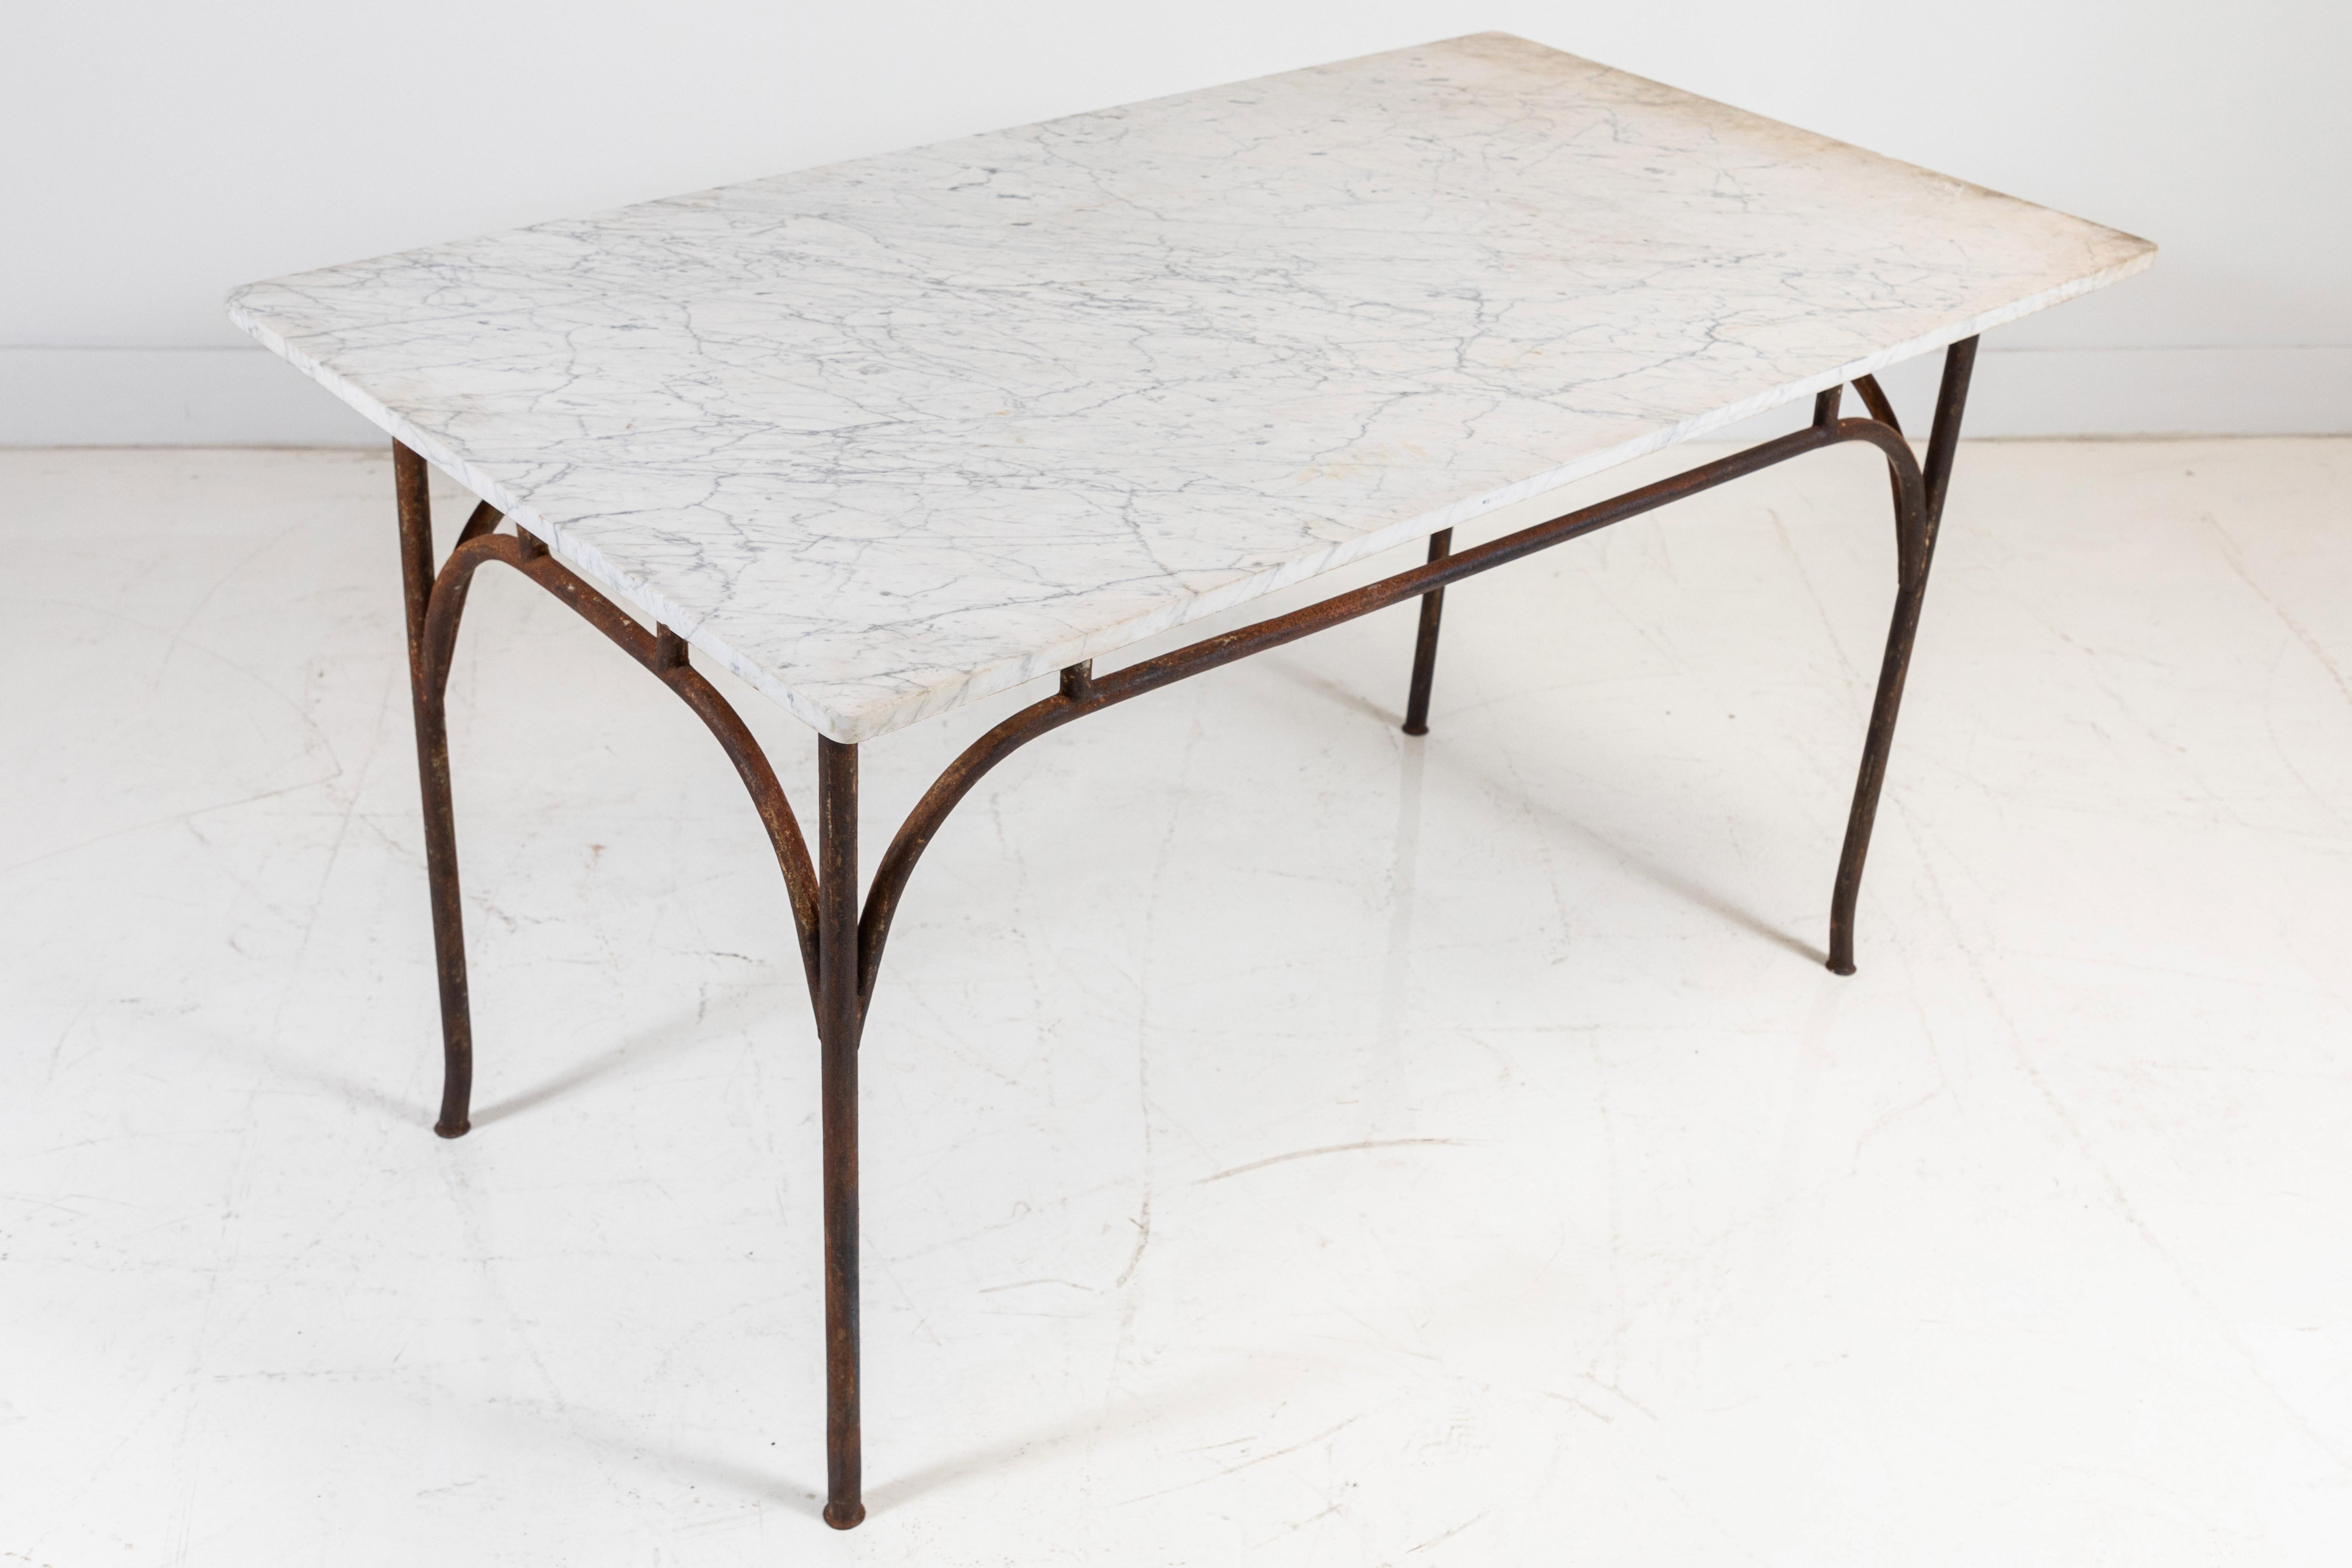 French tall marble and iron table. The table makes for a great kitchen island or outdoor garden piece.